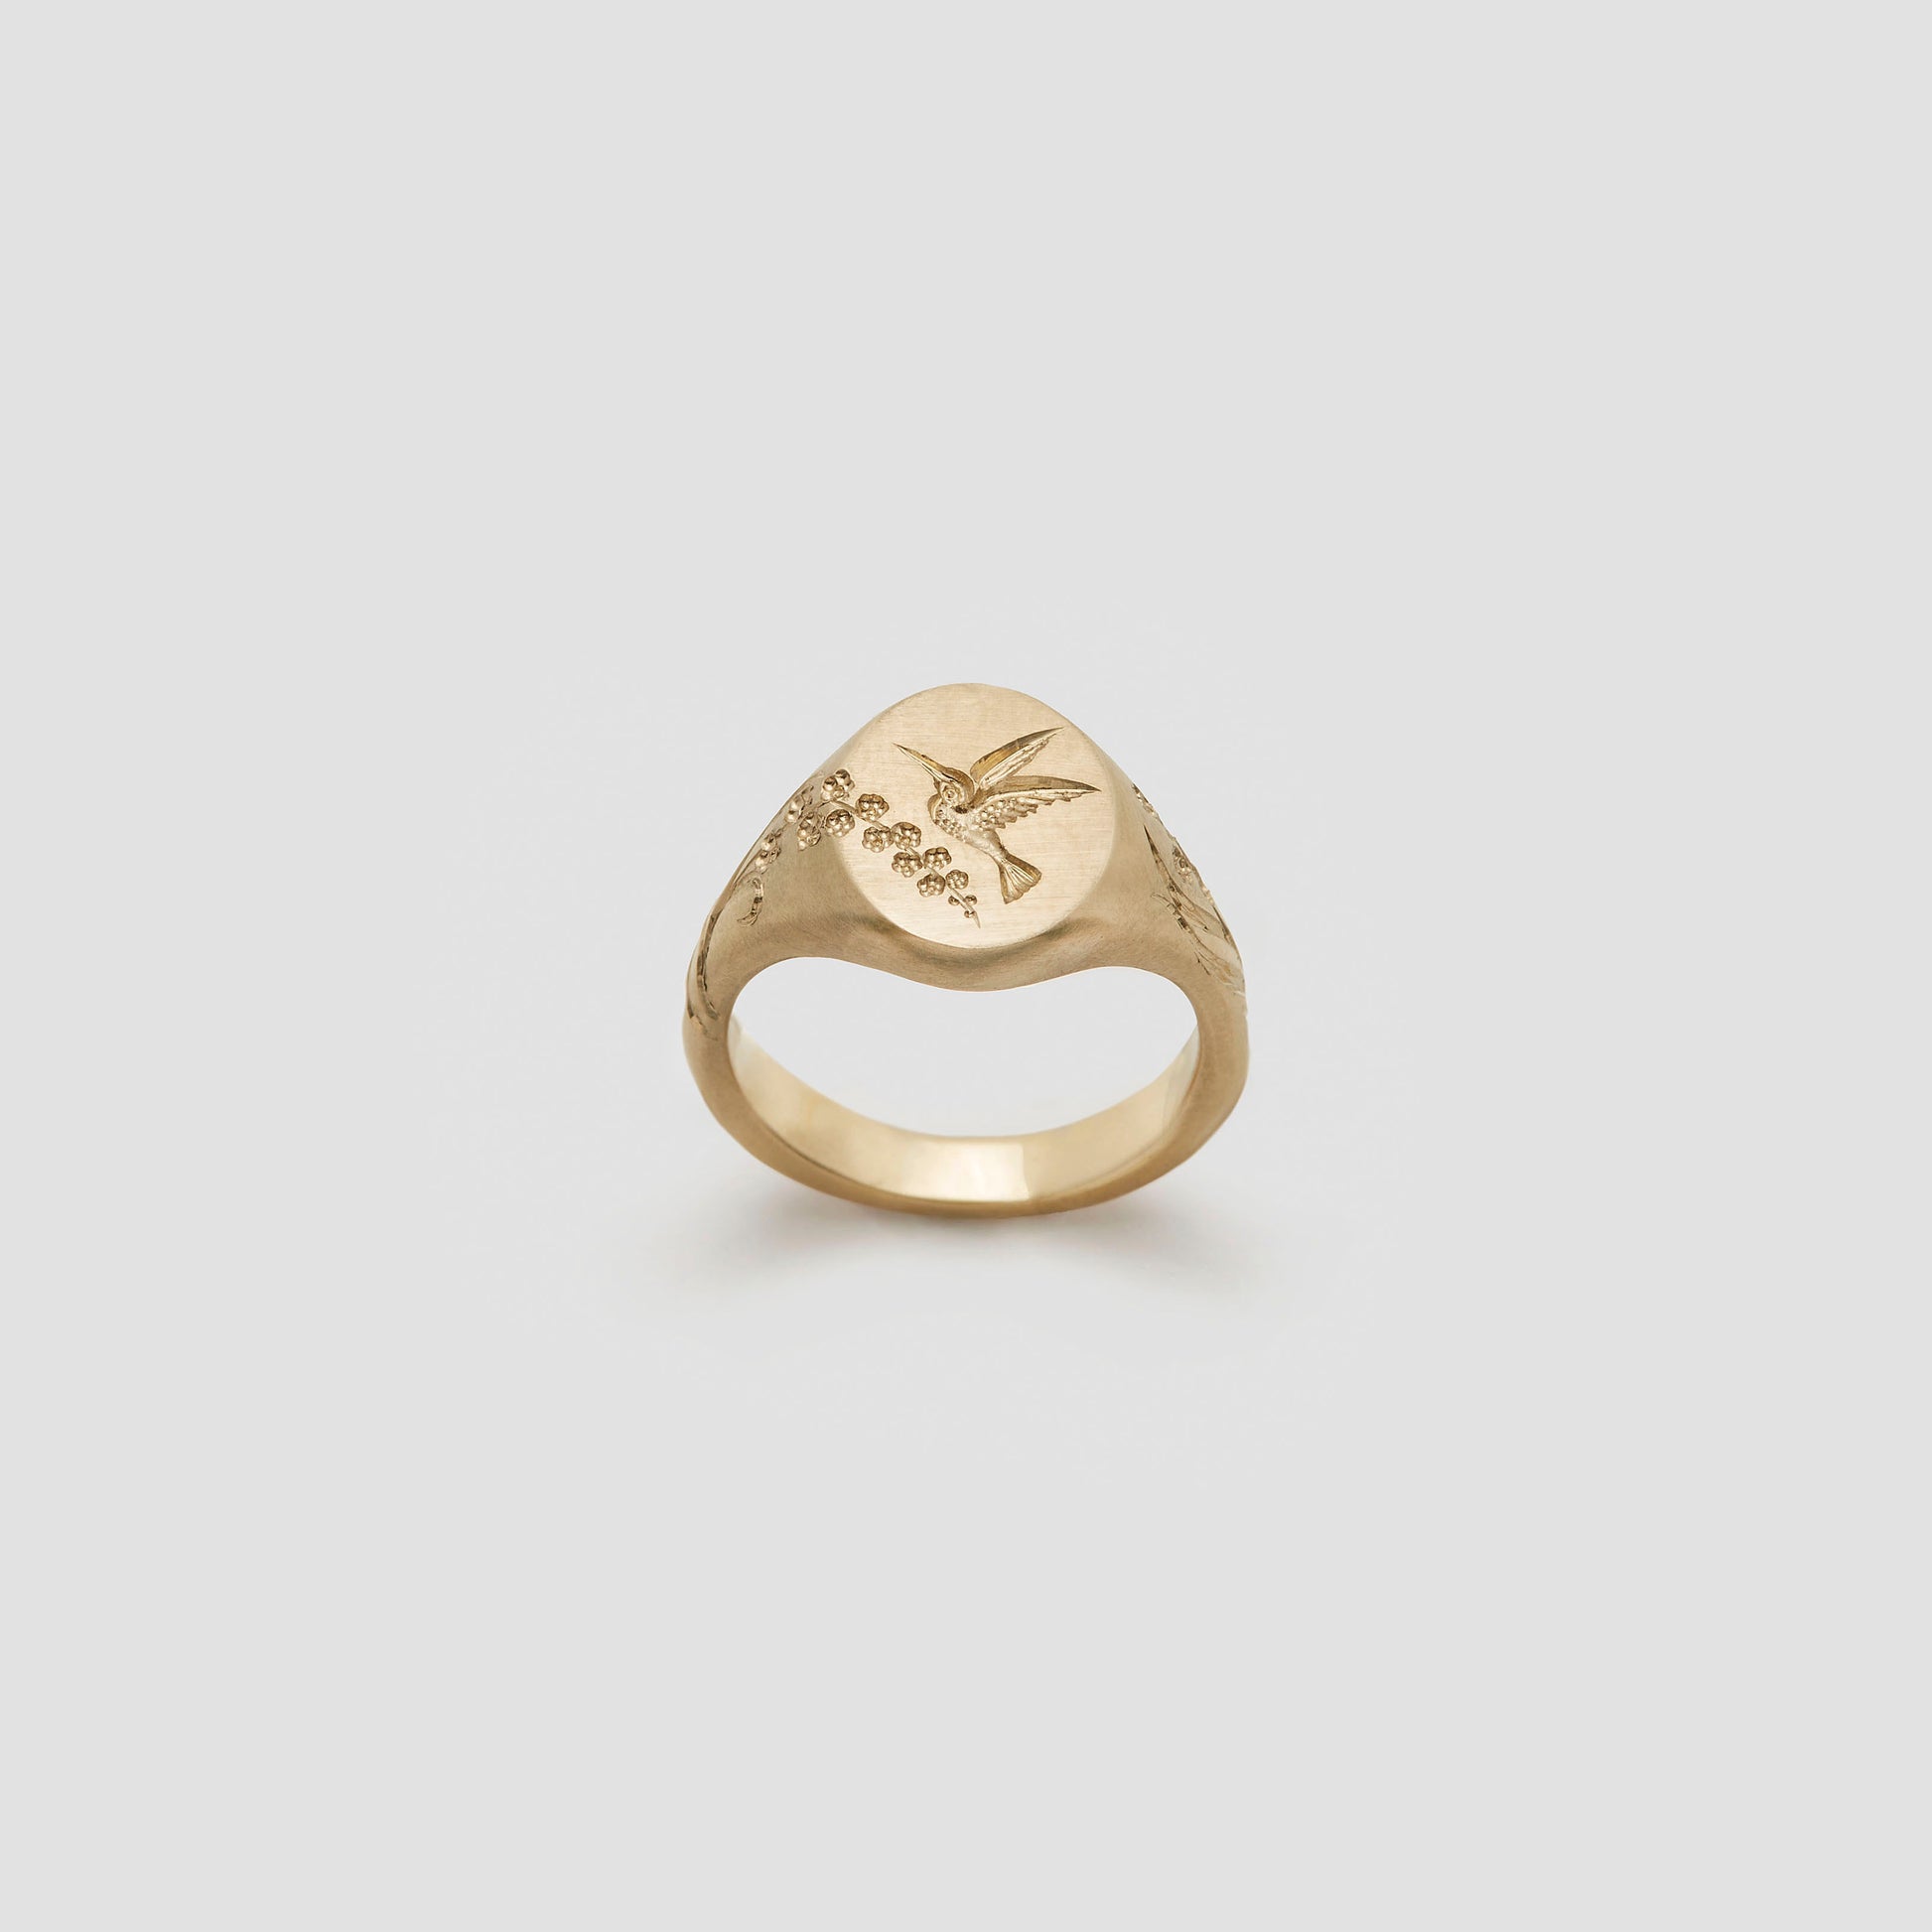 Castro Smith Jewelry Gold Hummingbird Signet Ring with Engravings.